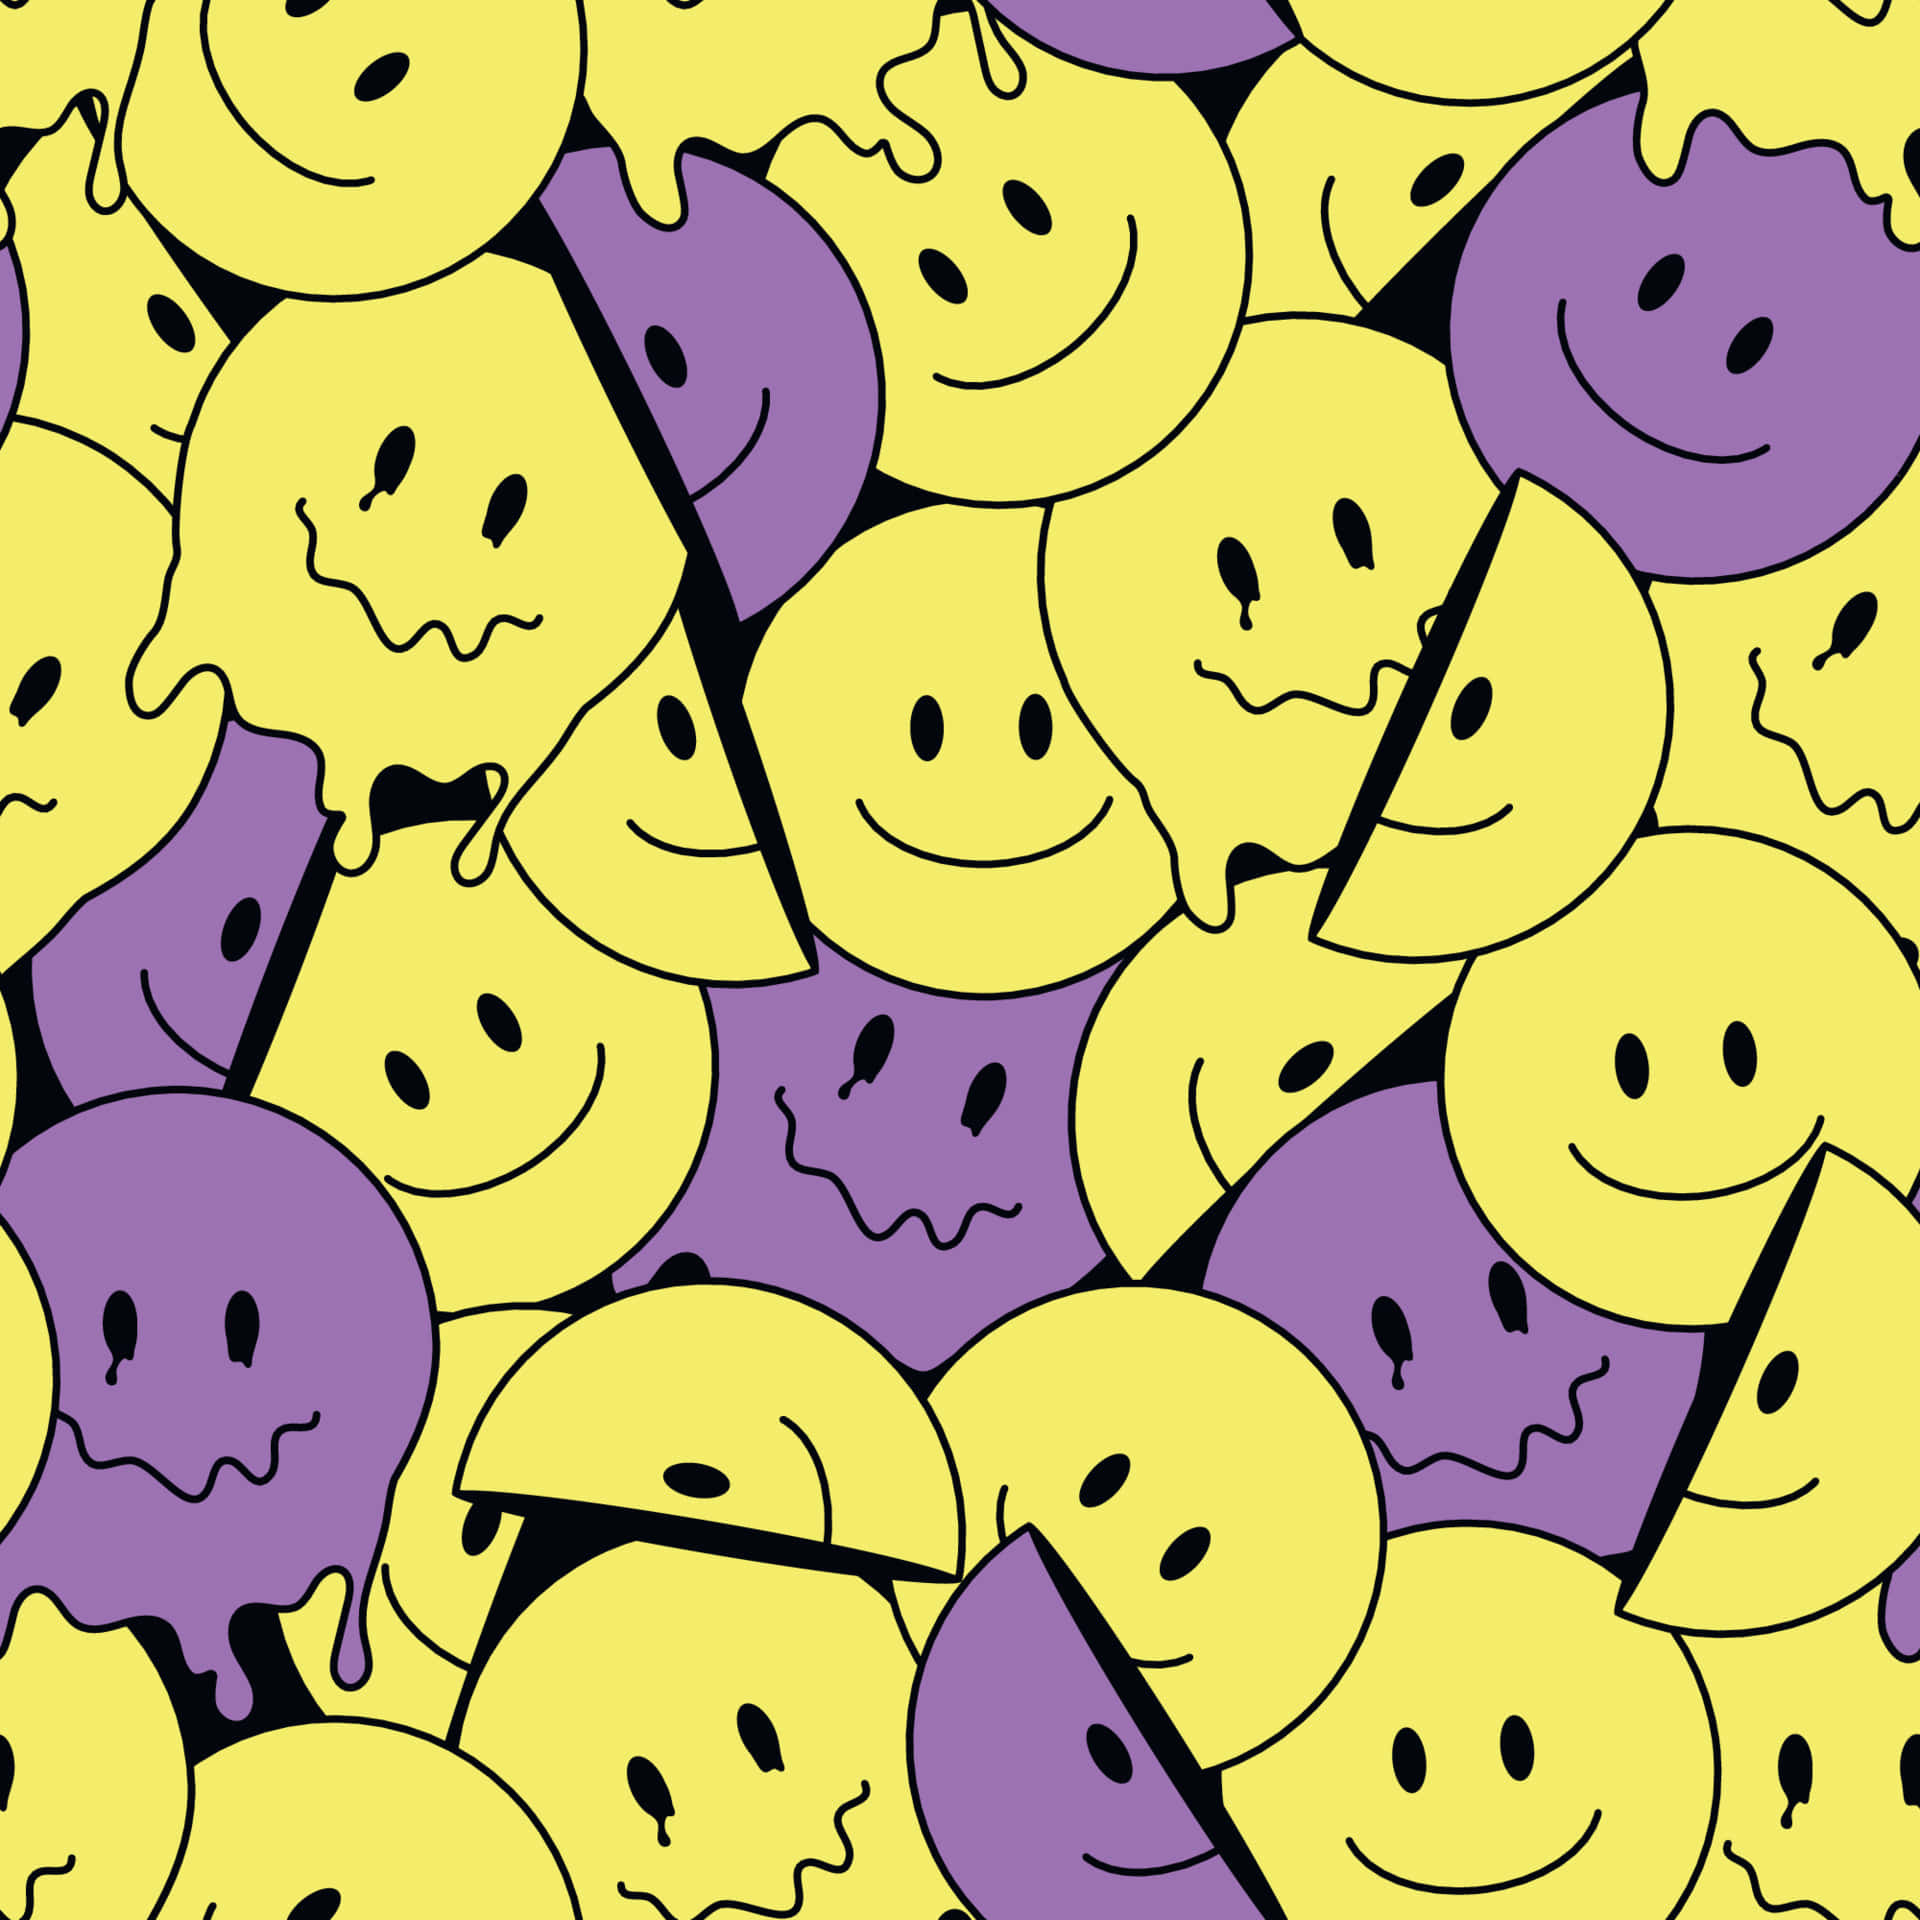 Funny Crazy Melted Seamless Pattern Aesthetic Trippy Smiley Face Wallpaper